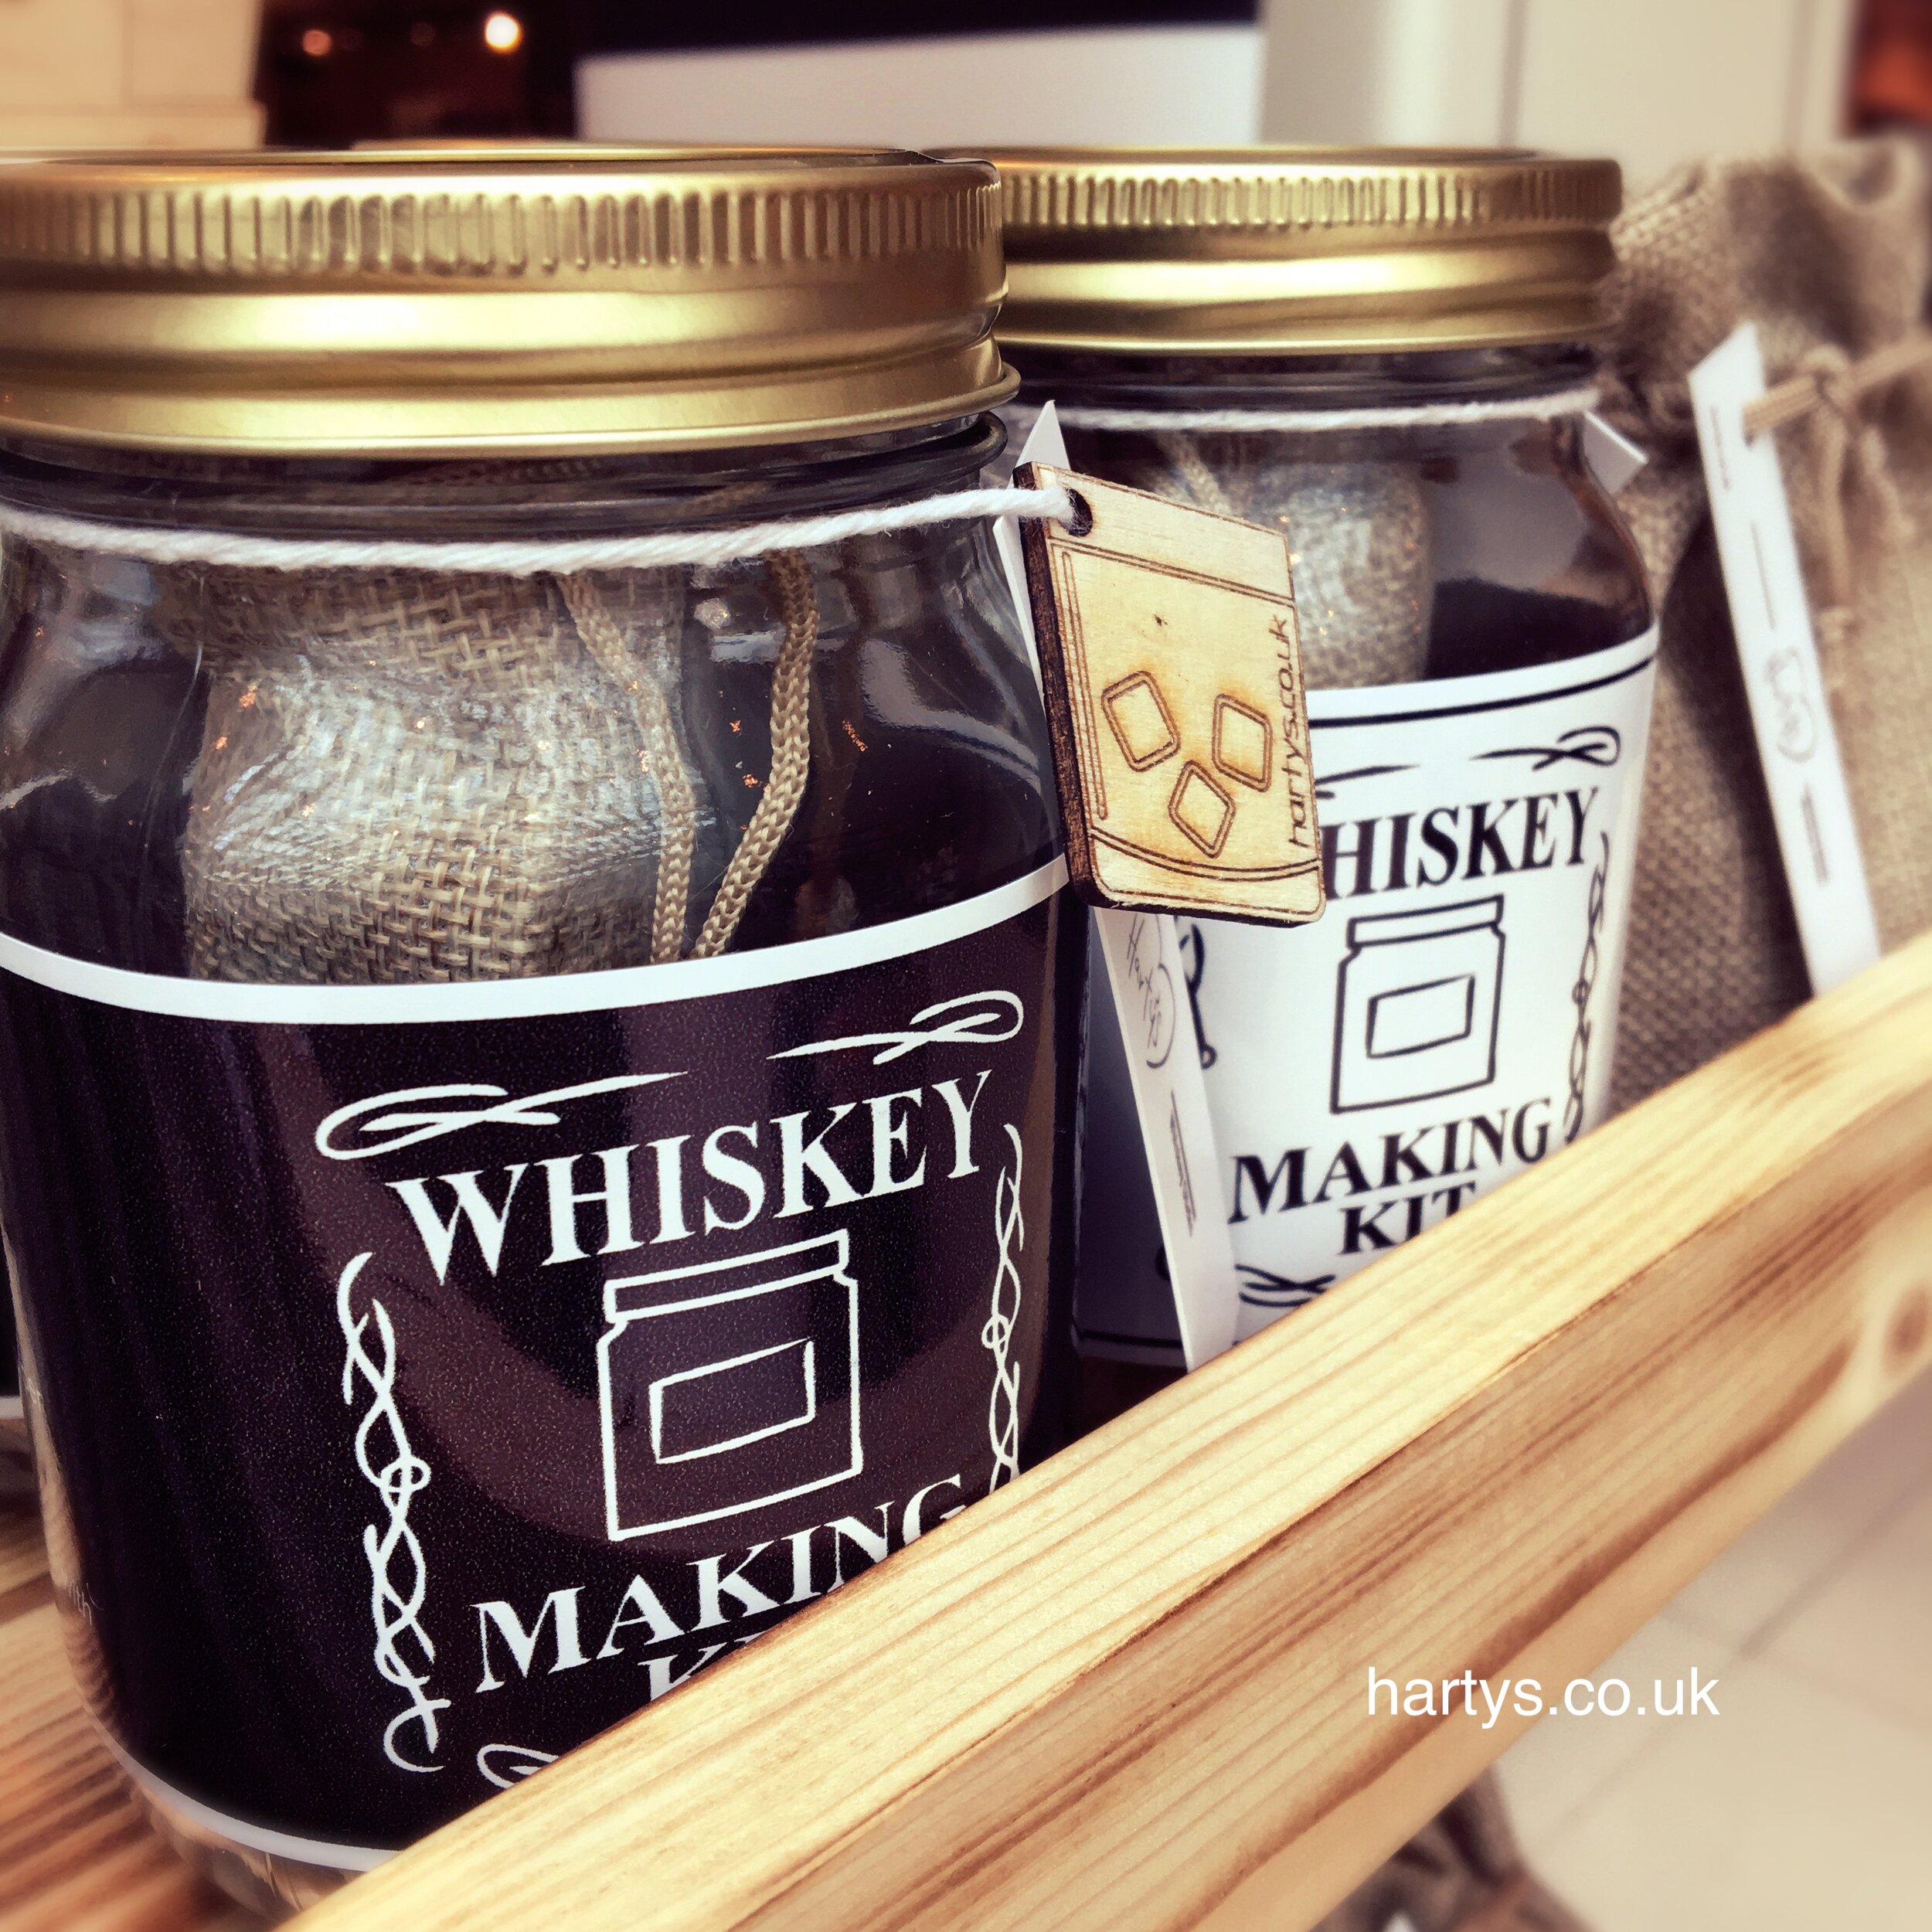 Make Whiskey from vodka with our best selling Whiskey Sticks® - Know a whiskey lover? Then read on…Our Oak Whiskey Sticks® allow you to make your own unique whiskey, from vodka on a small scale at home.A perfect gift with a difference, for that hard-to-buy for-someone!3 Gift Bags for £12 is back!Our Whiskey Making Gift Sets are available for collection. Please get in touch to arrange.